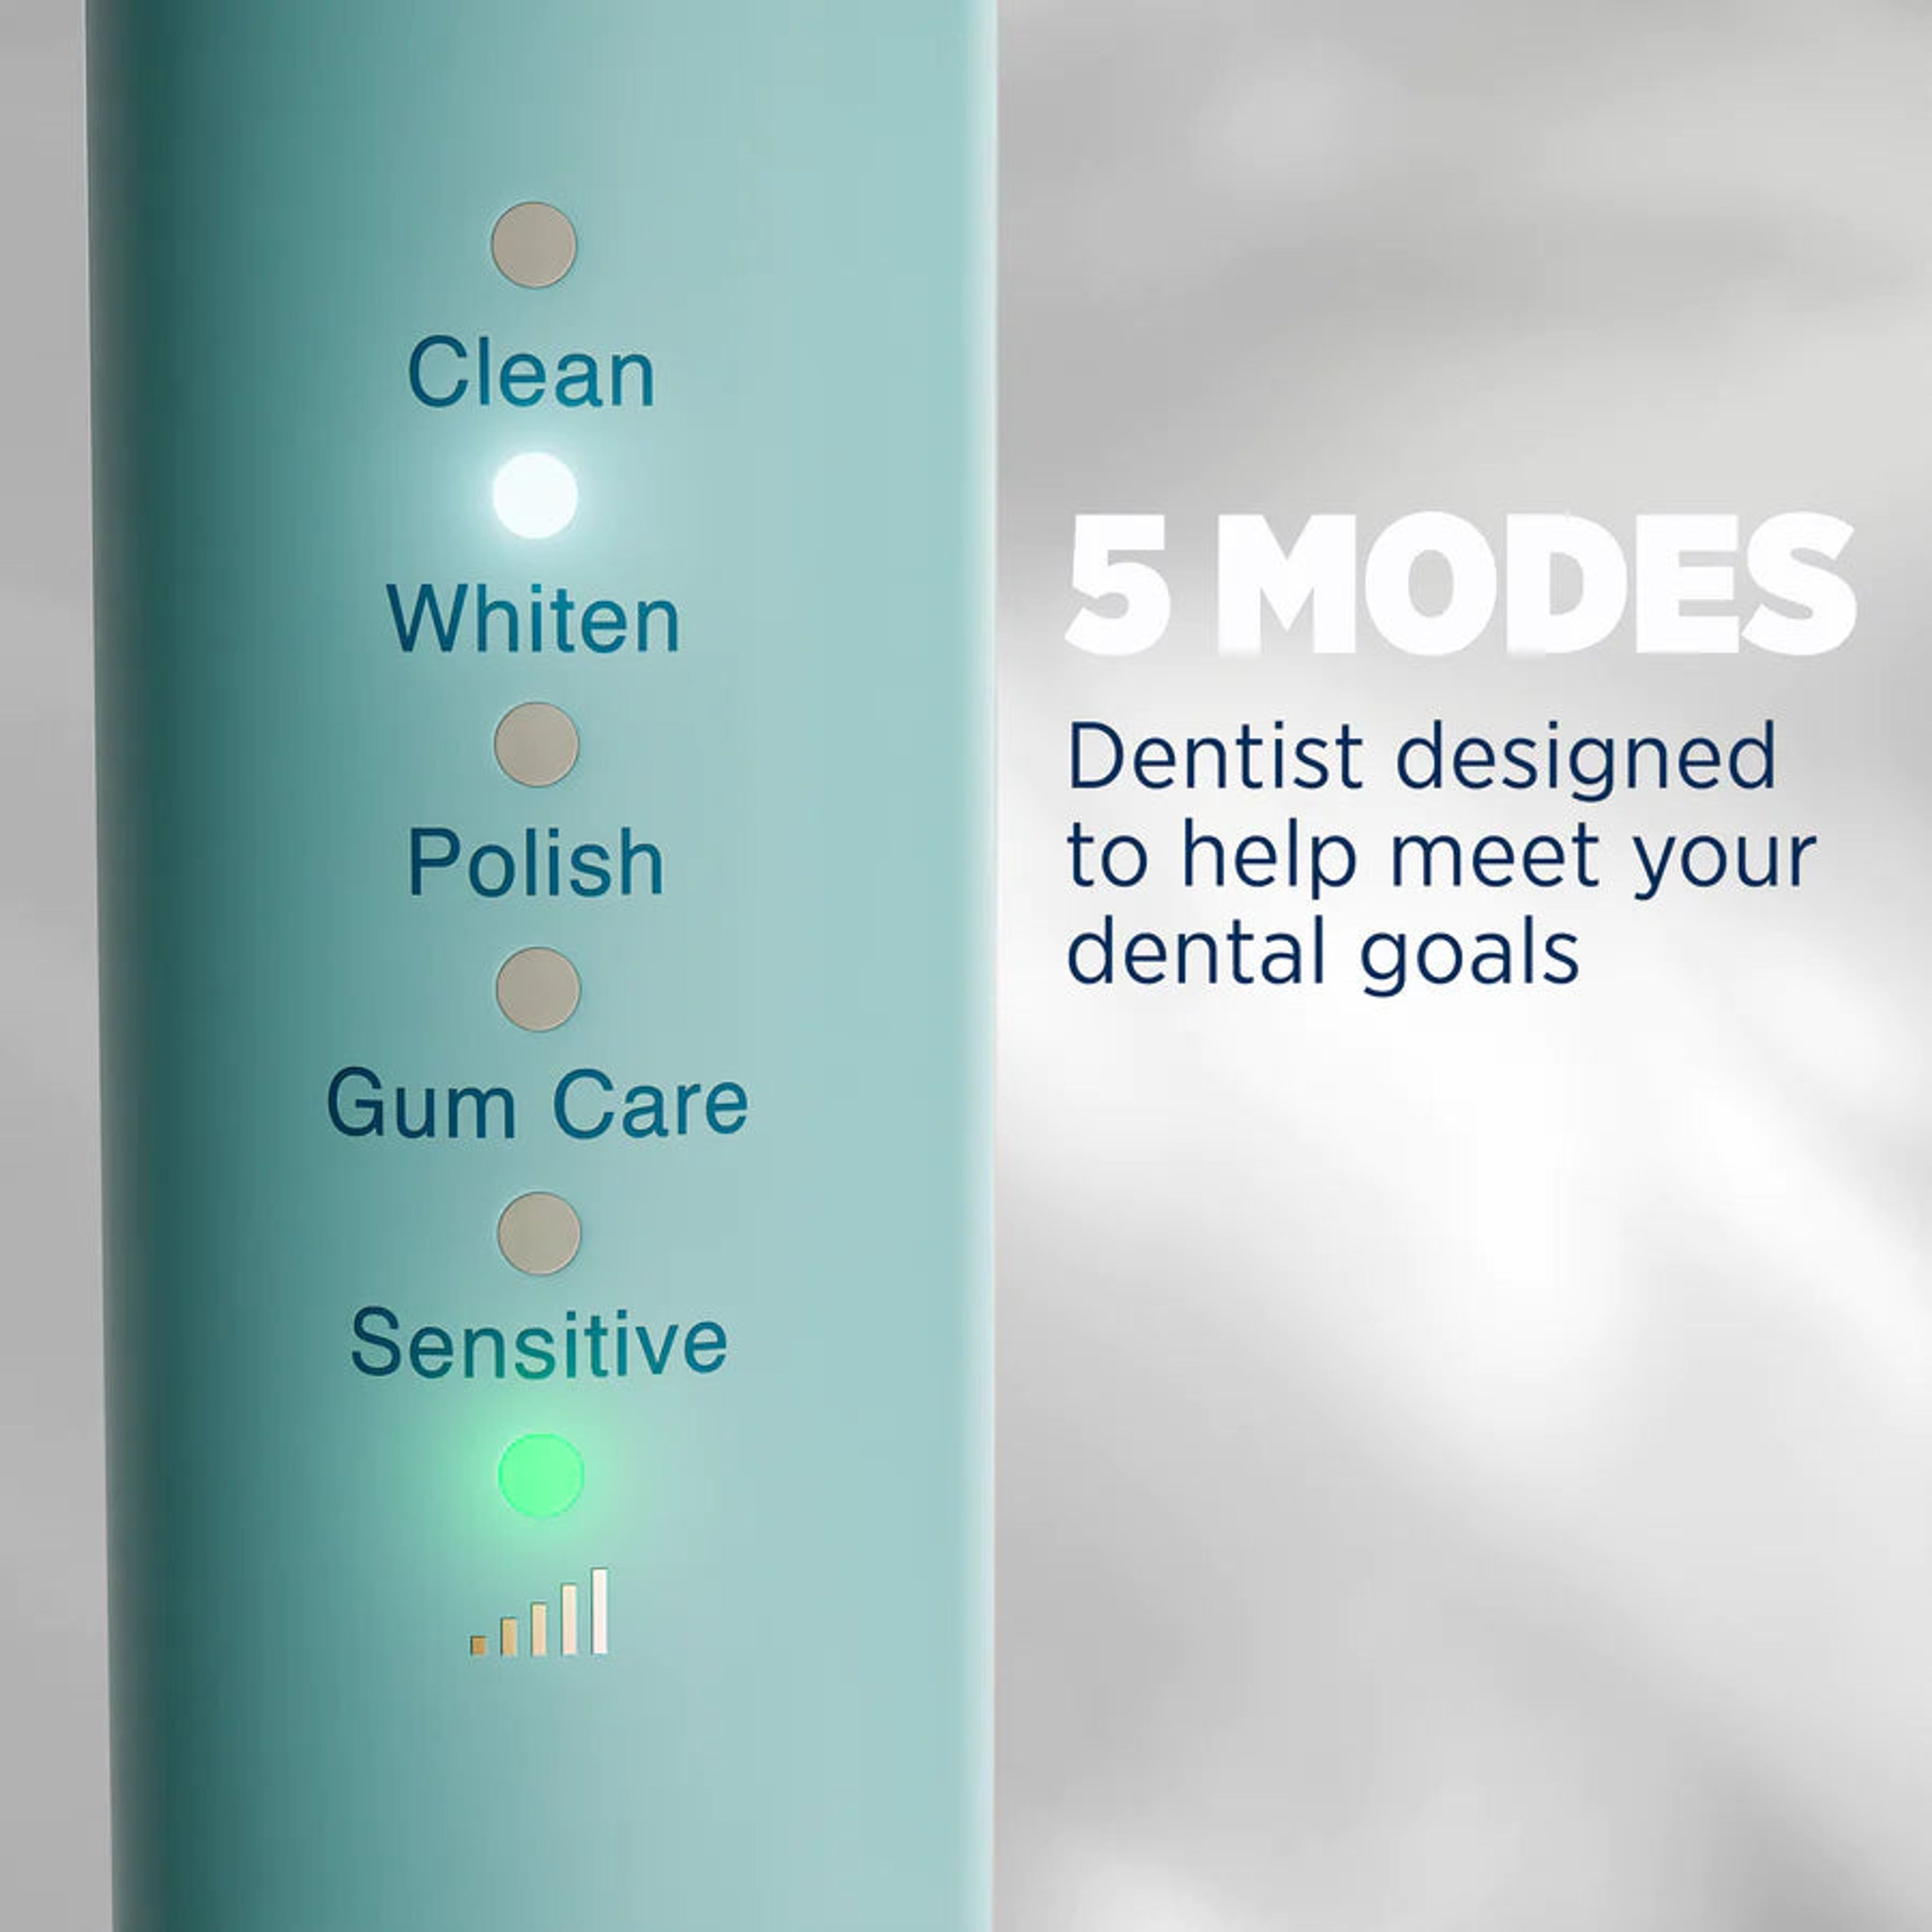 Lumineux Sonic Electric Toothbrush (In Bloom) + Lumineux Sonic Electric Toothbrush (Crystalline) Bundle